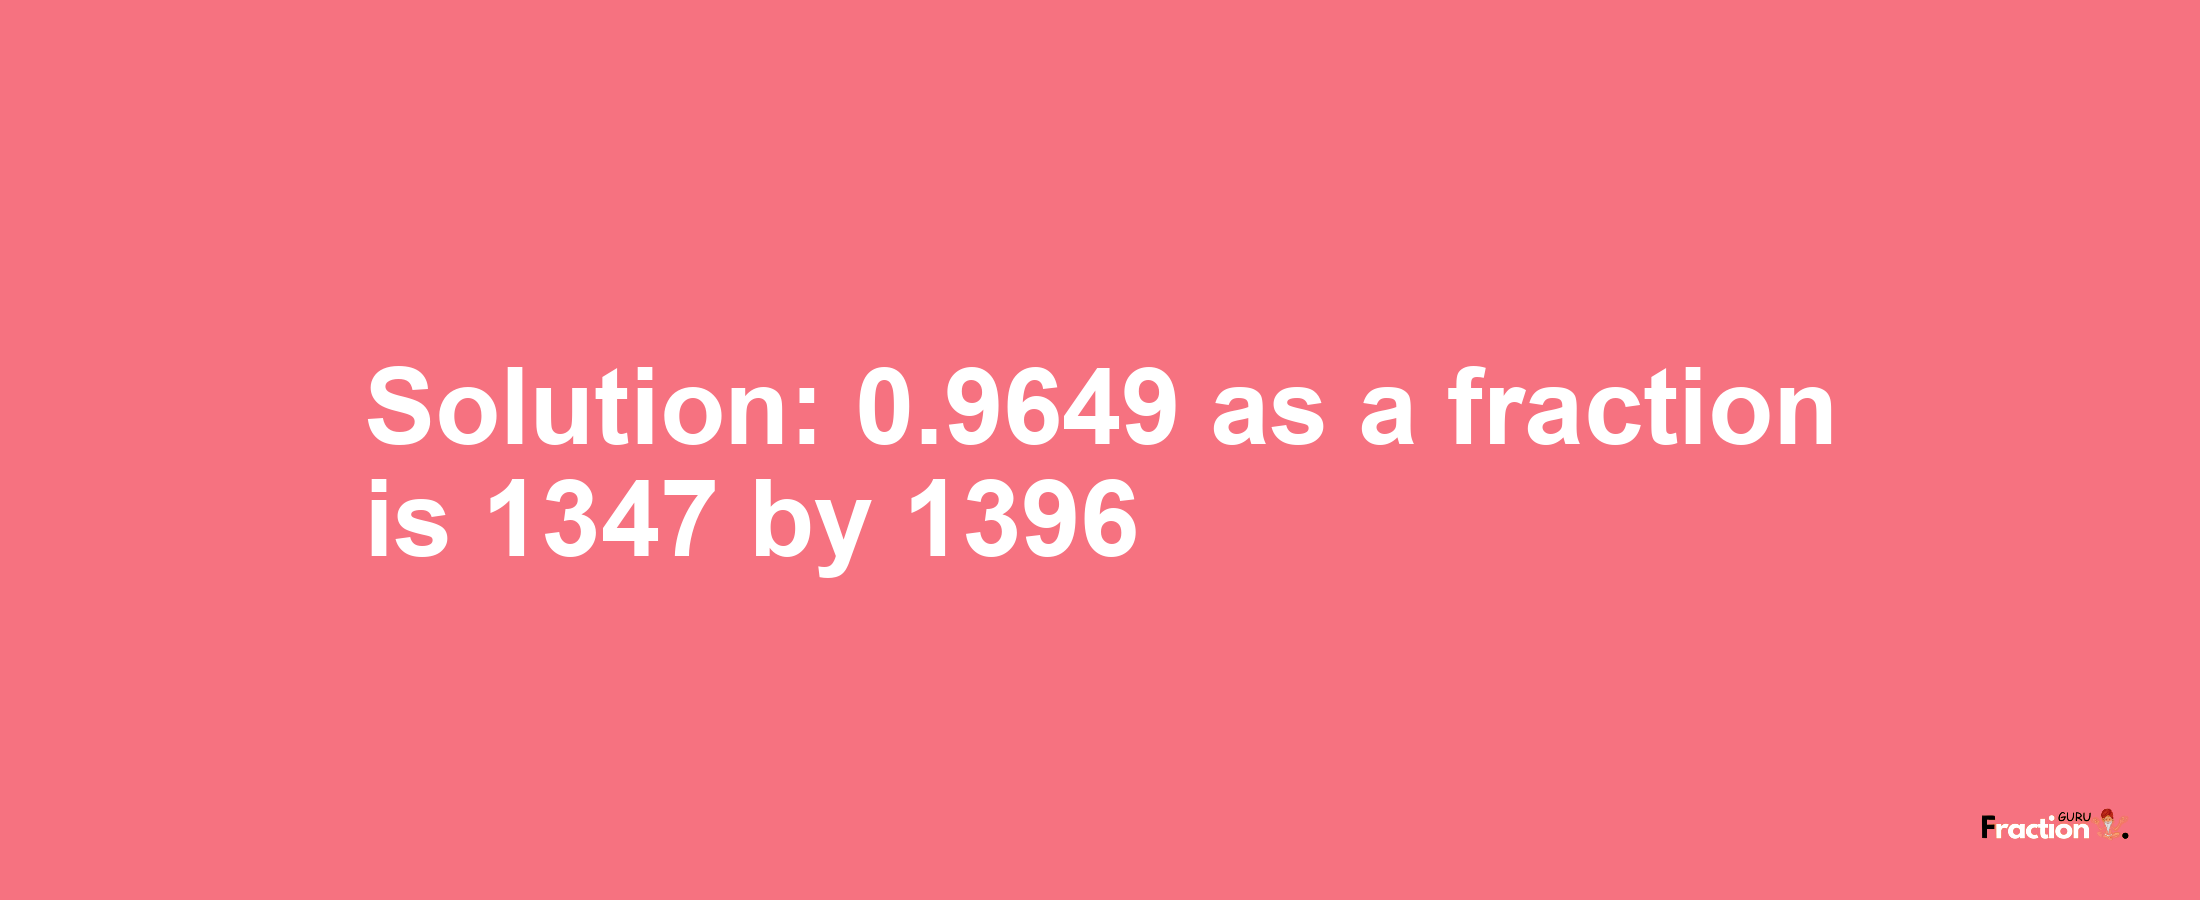 Solution:0.9649 as a fraction is 1347/1396